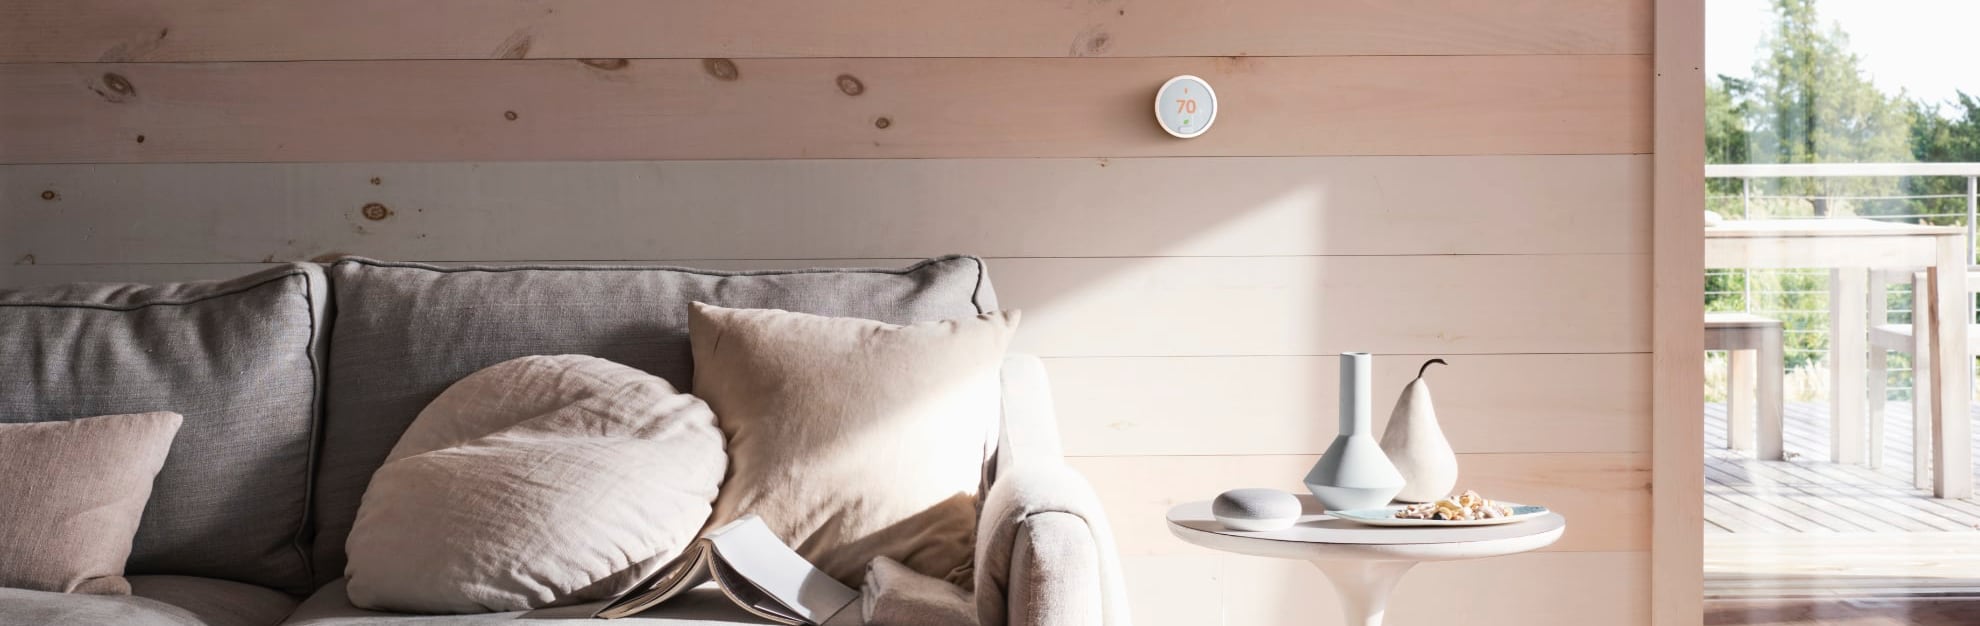 Vivint Home Automation in Stockton